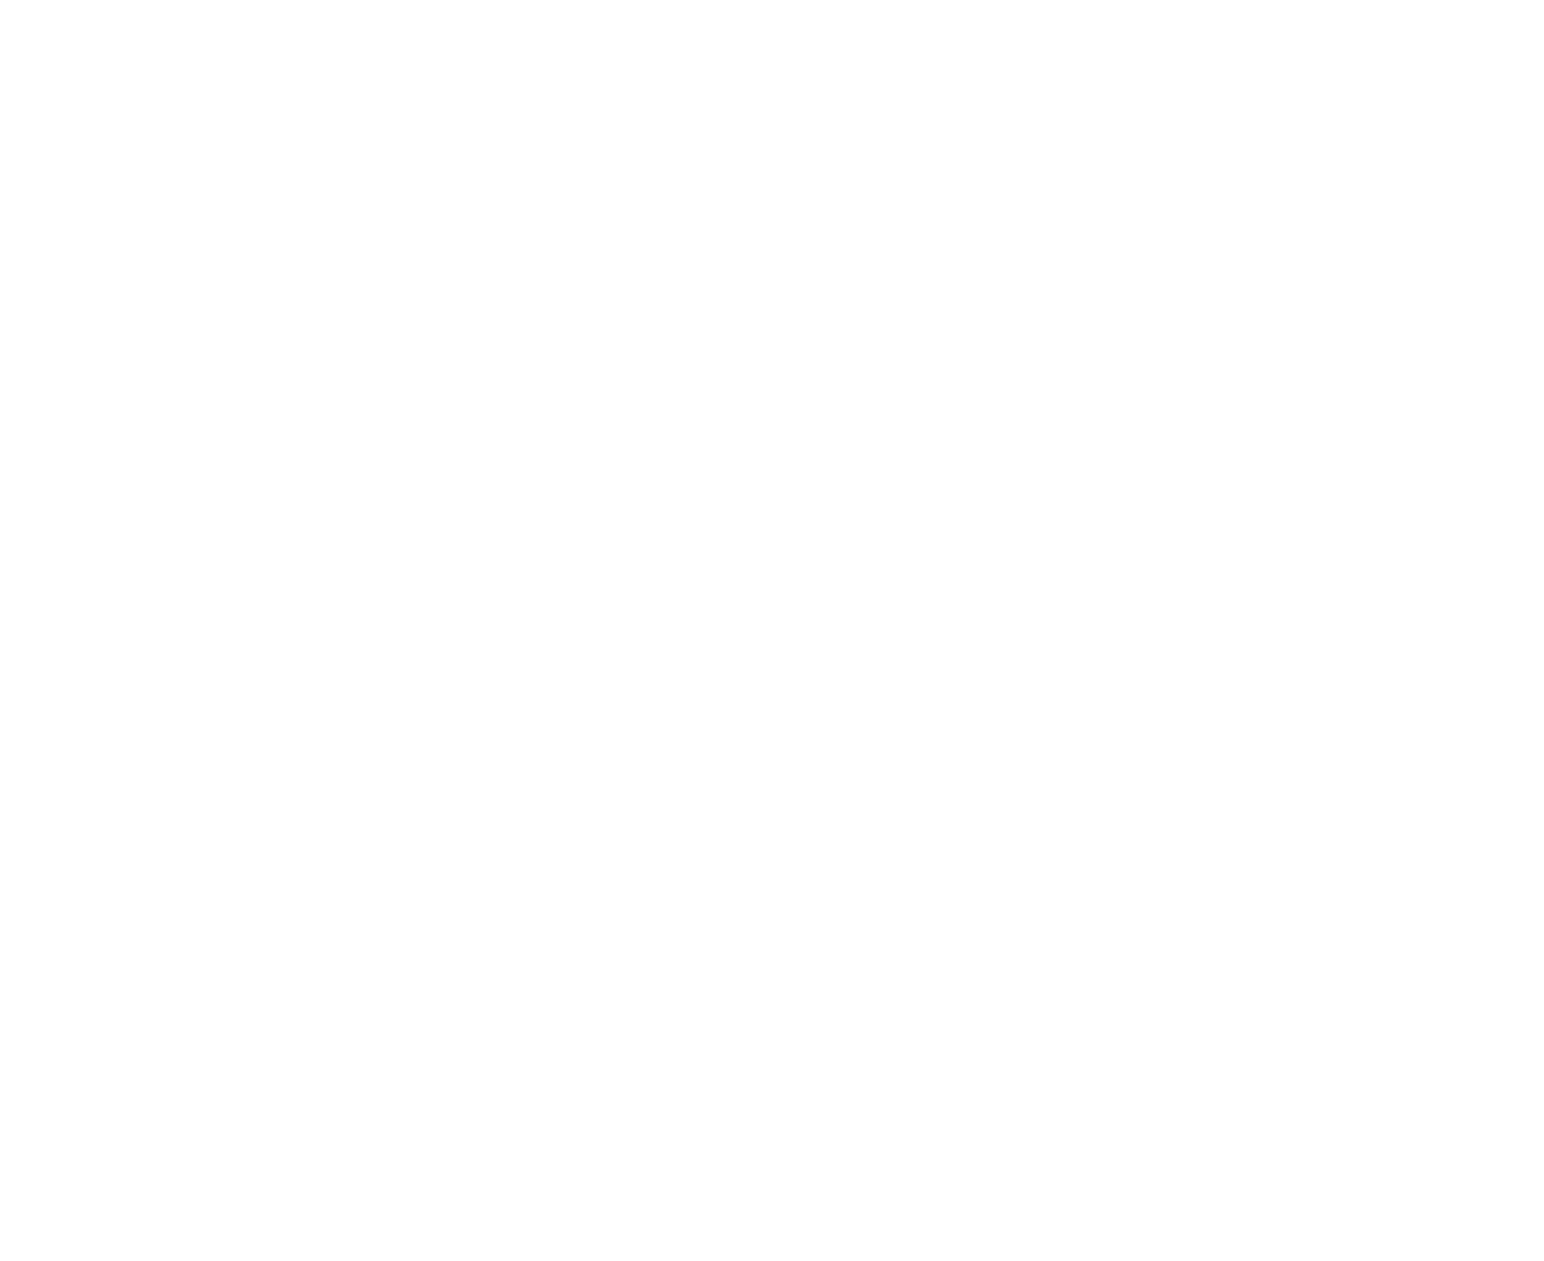 City Cement Company logo for dark backgrounds (transparent PNG)